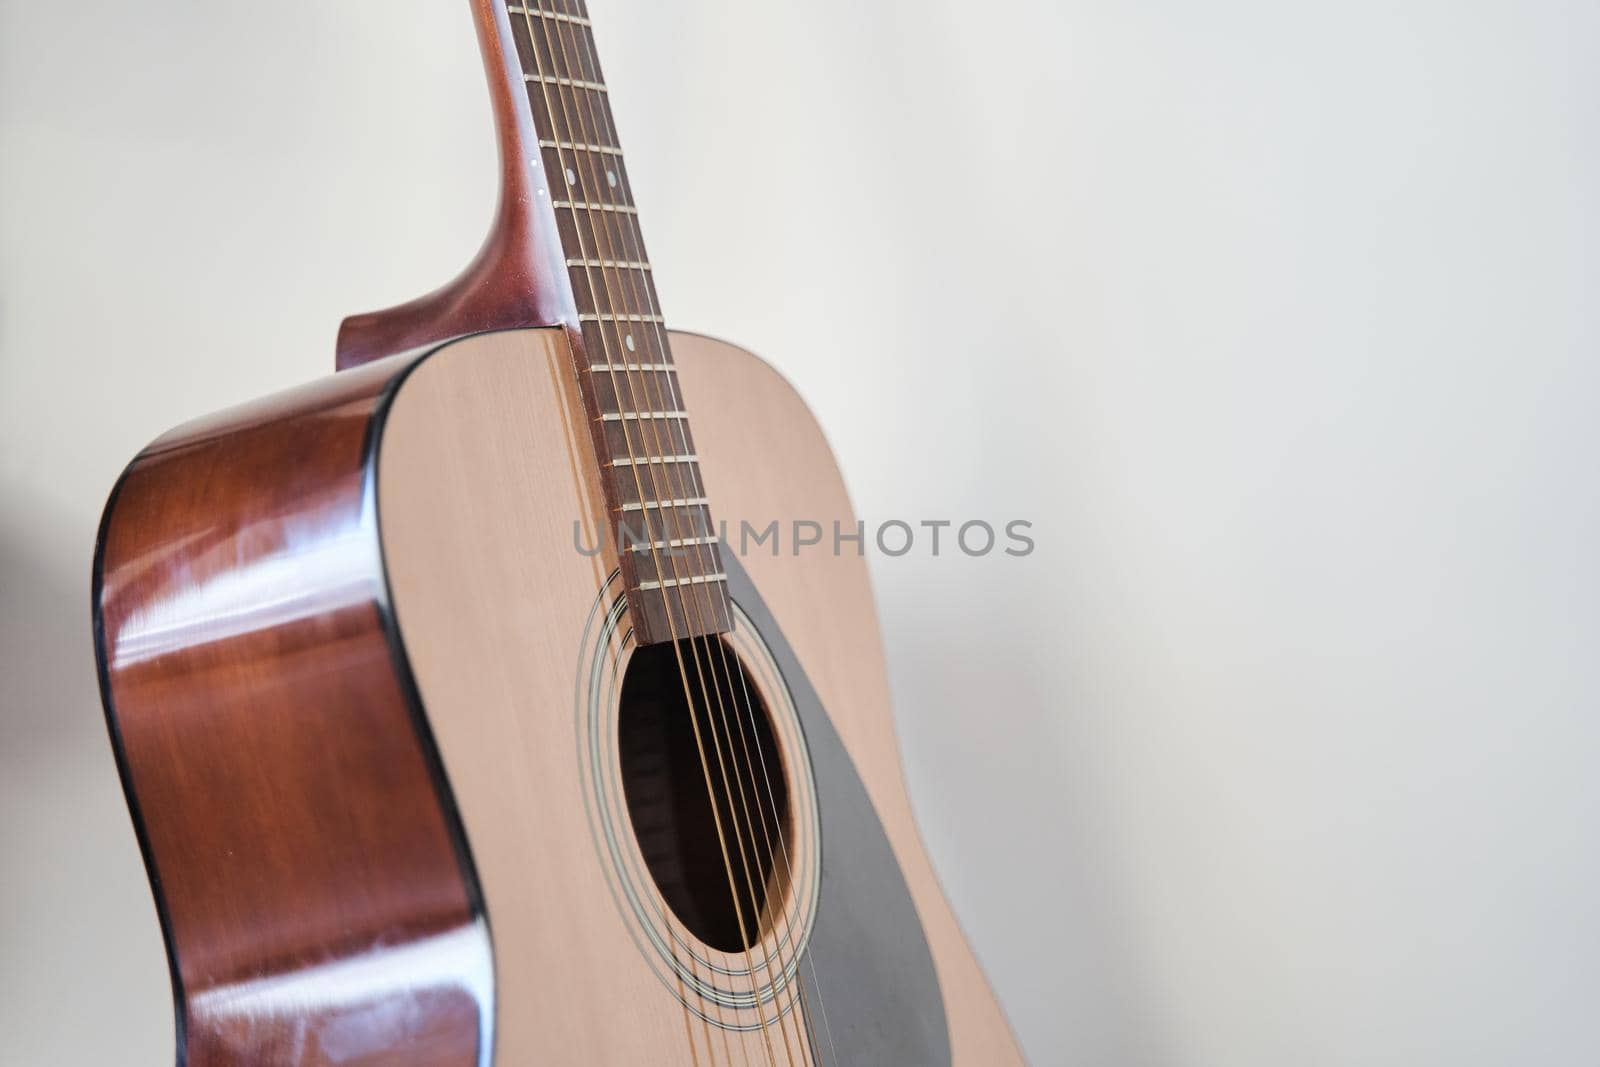 Soundboard of an acoustic guitar close up on a white background.